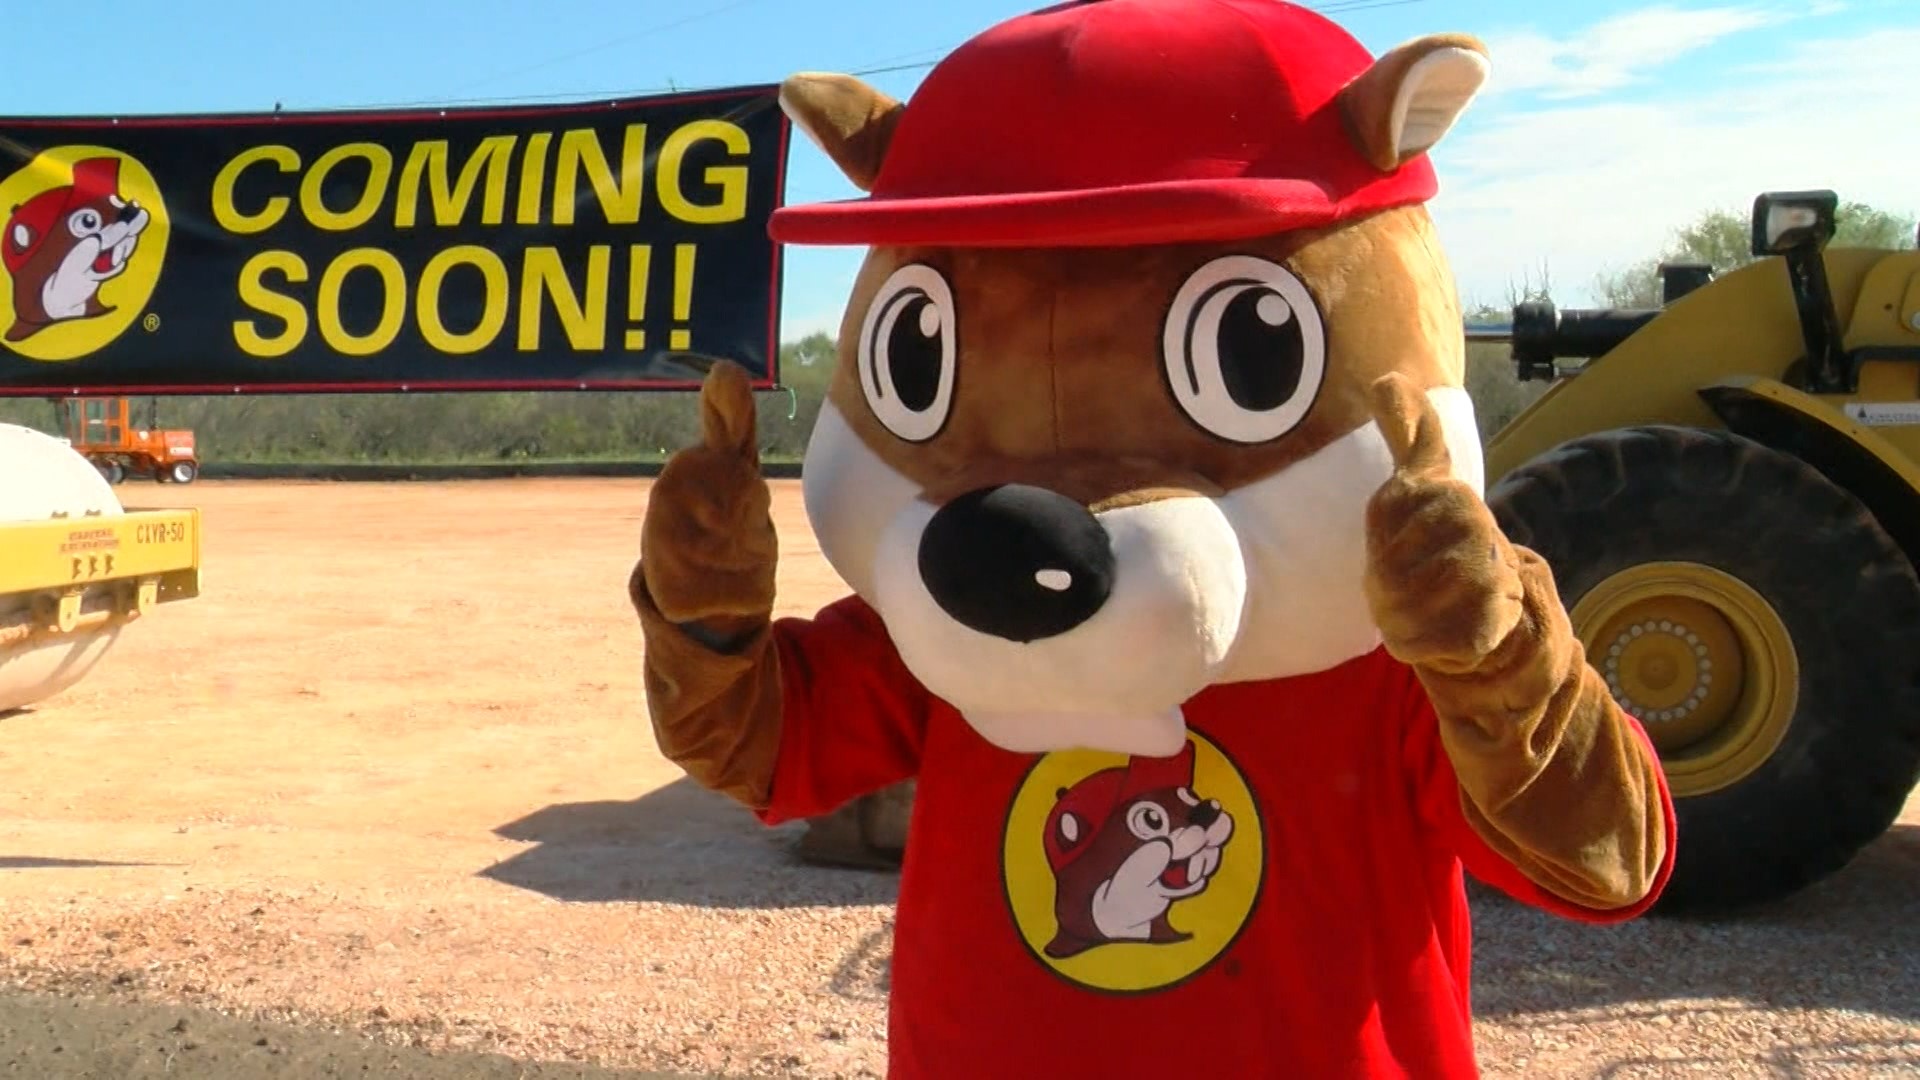 In 18 months, the largest Buc-ee's in the country will return home.